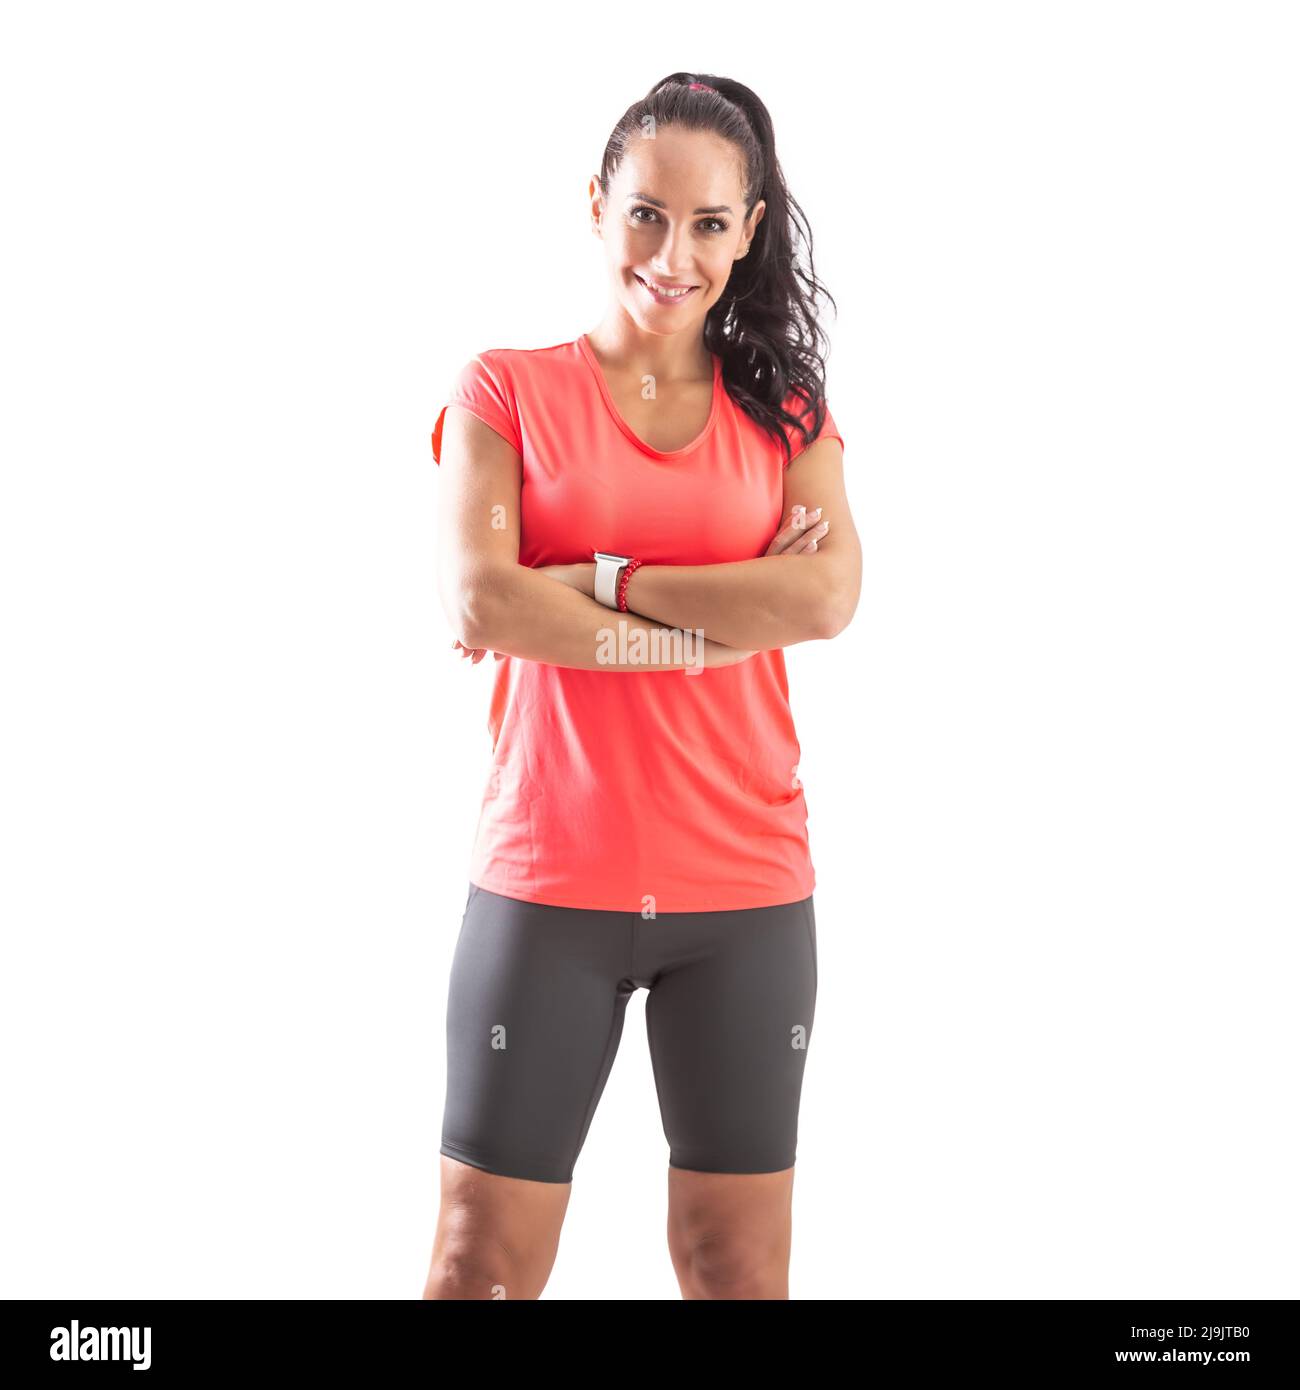 https://c8.alamy.com/comp/2J9JTB0/fitness-instructor-rests-her-arms-crossed-ready-for-a-workout-on-an-isolated-white-background-2J9JTB0.jpg